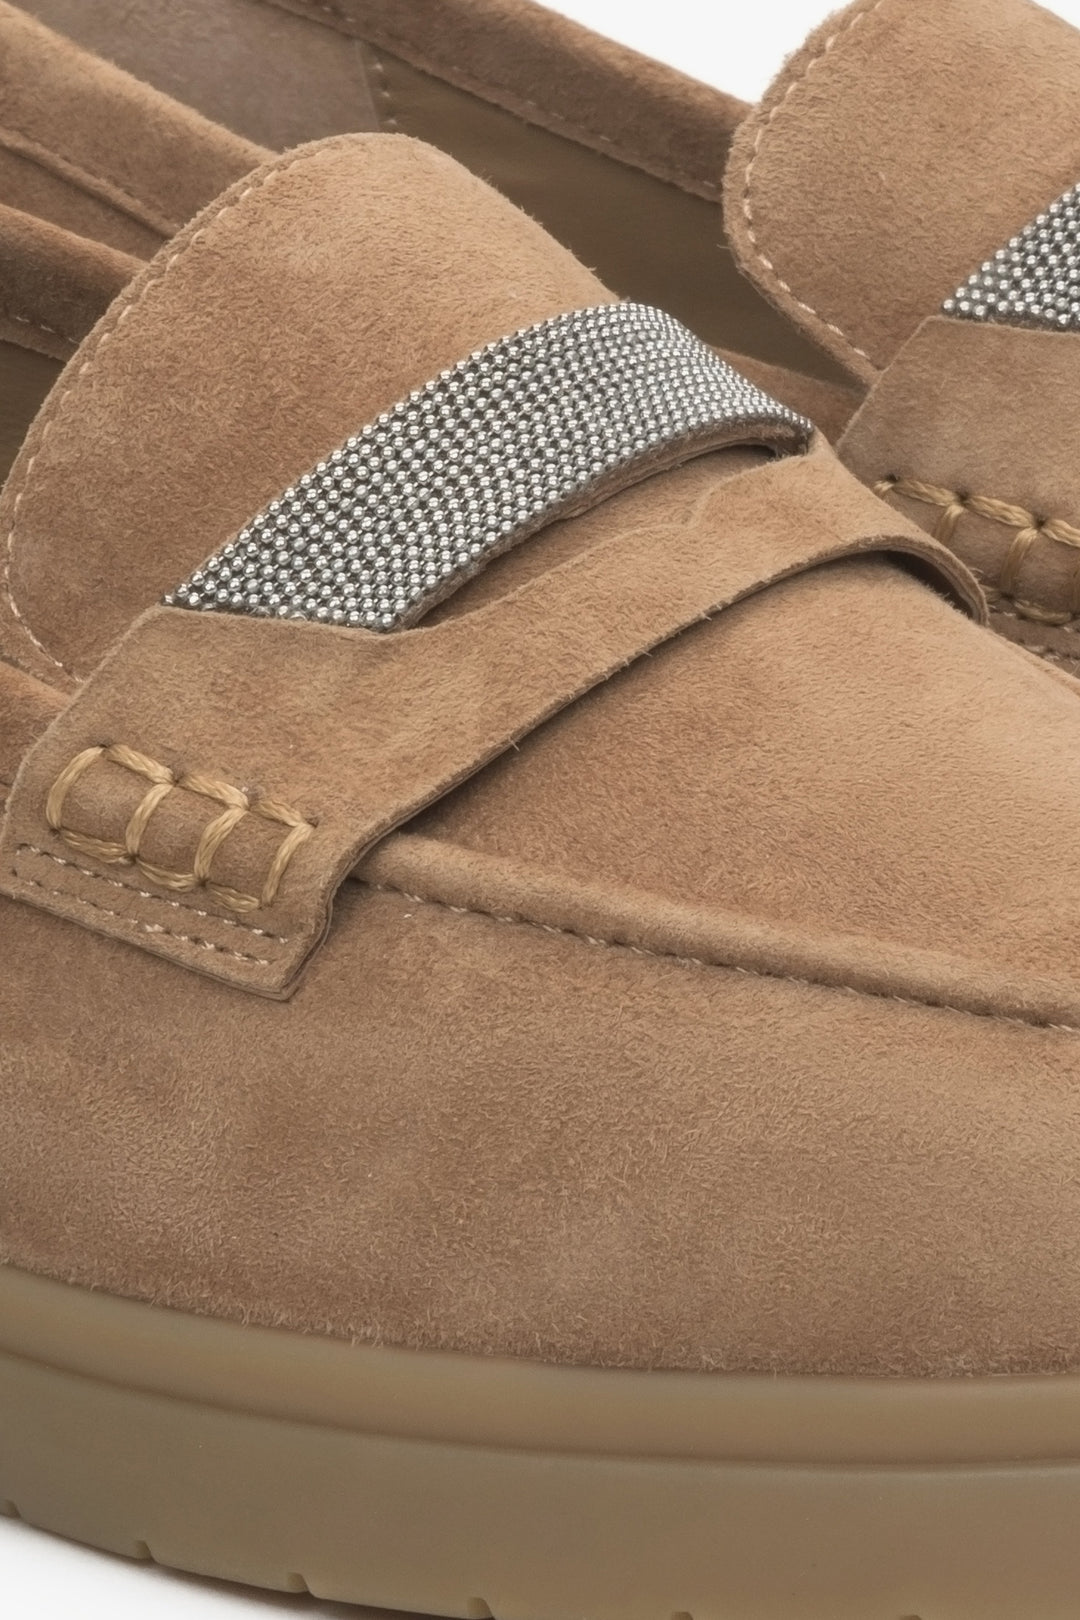 Women's brown velour moccasins by Estro - close-up on detail.